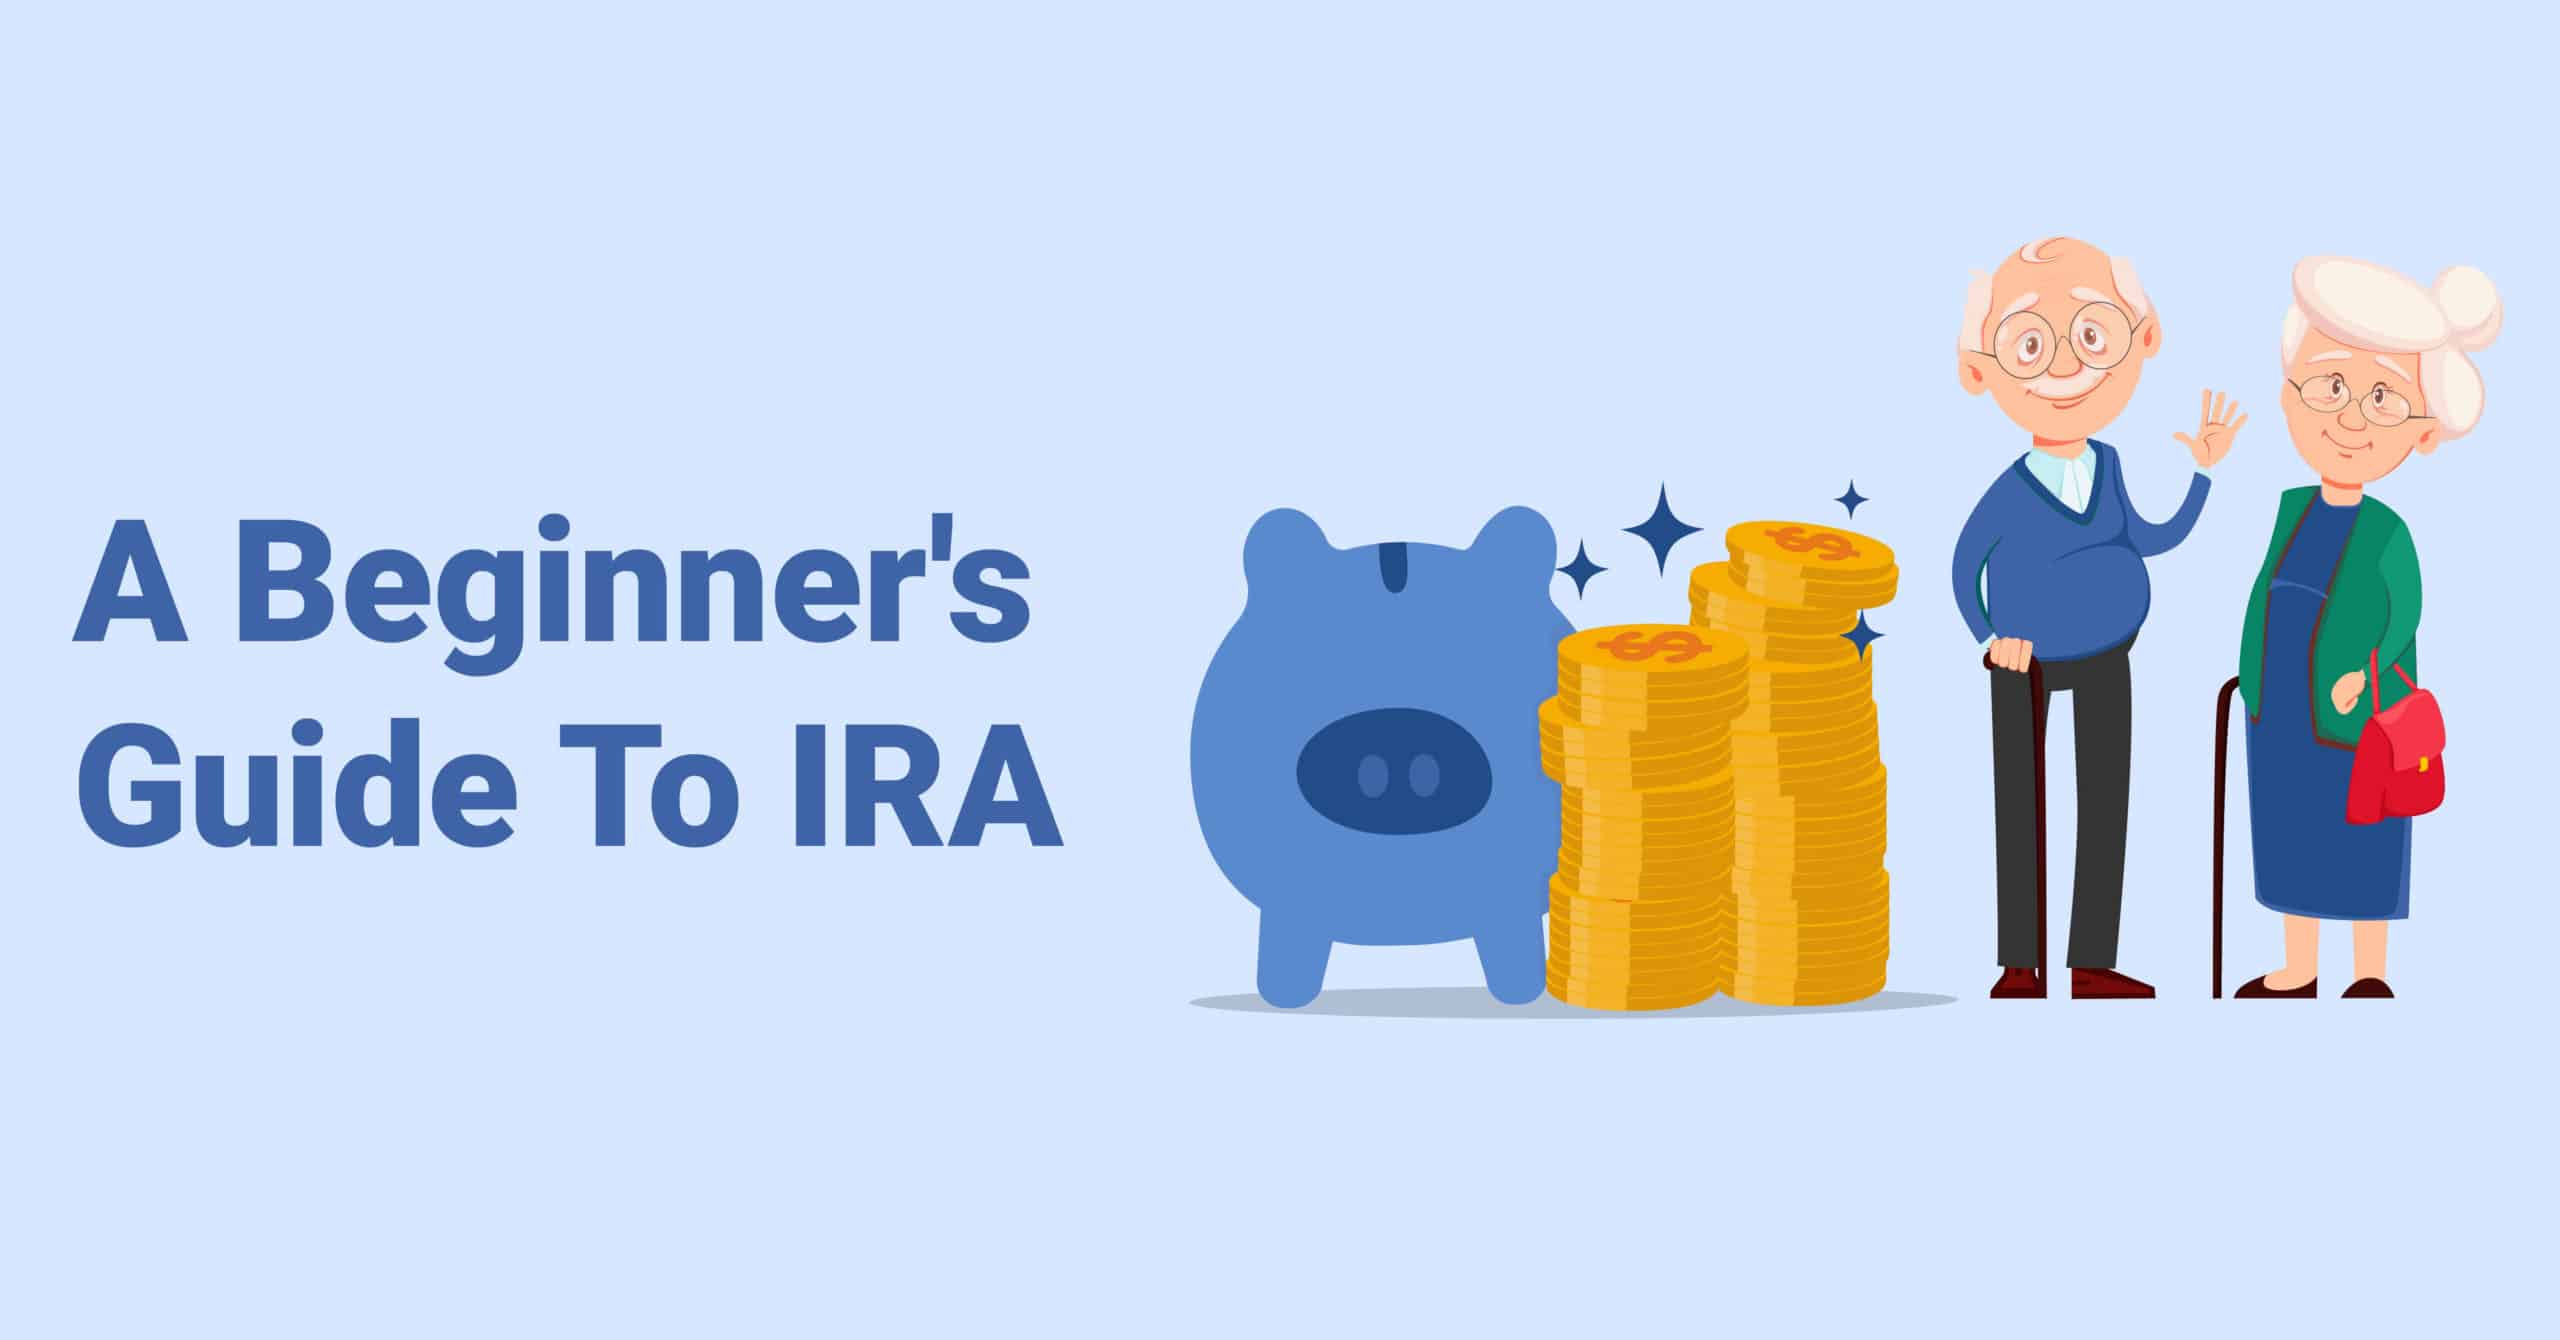 A Beginner's Guide To IRA